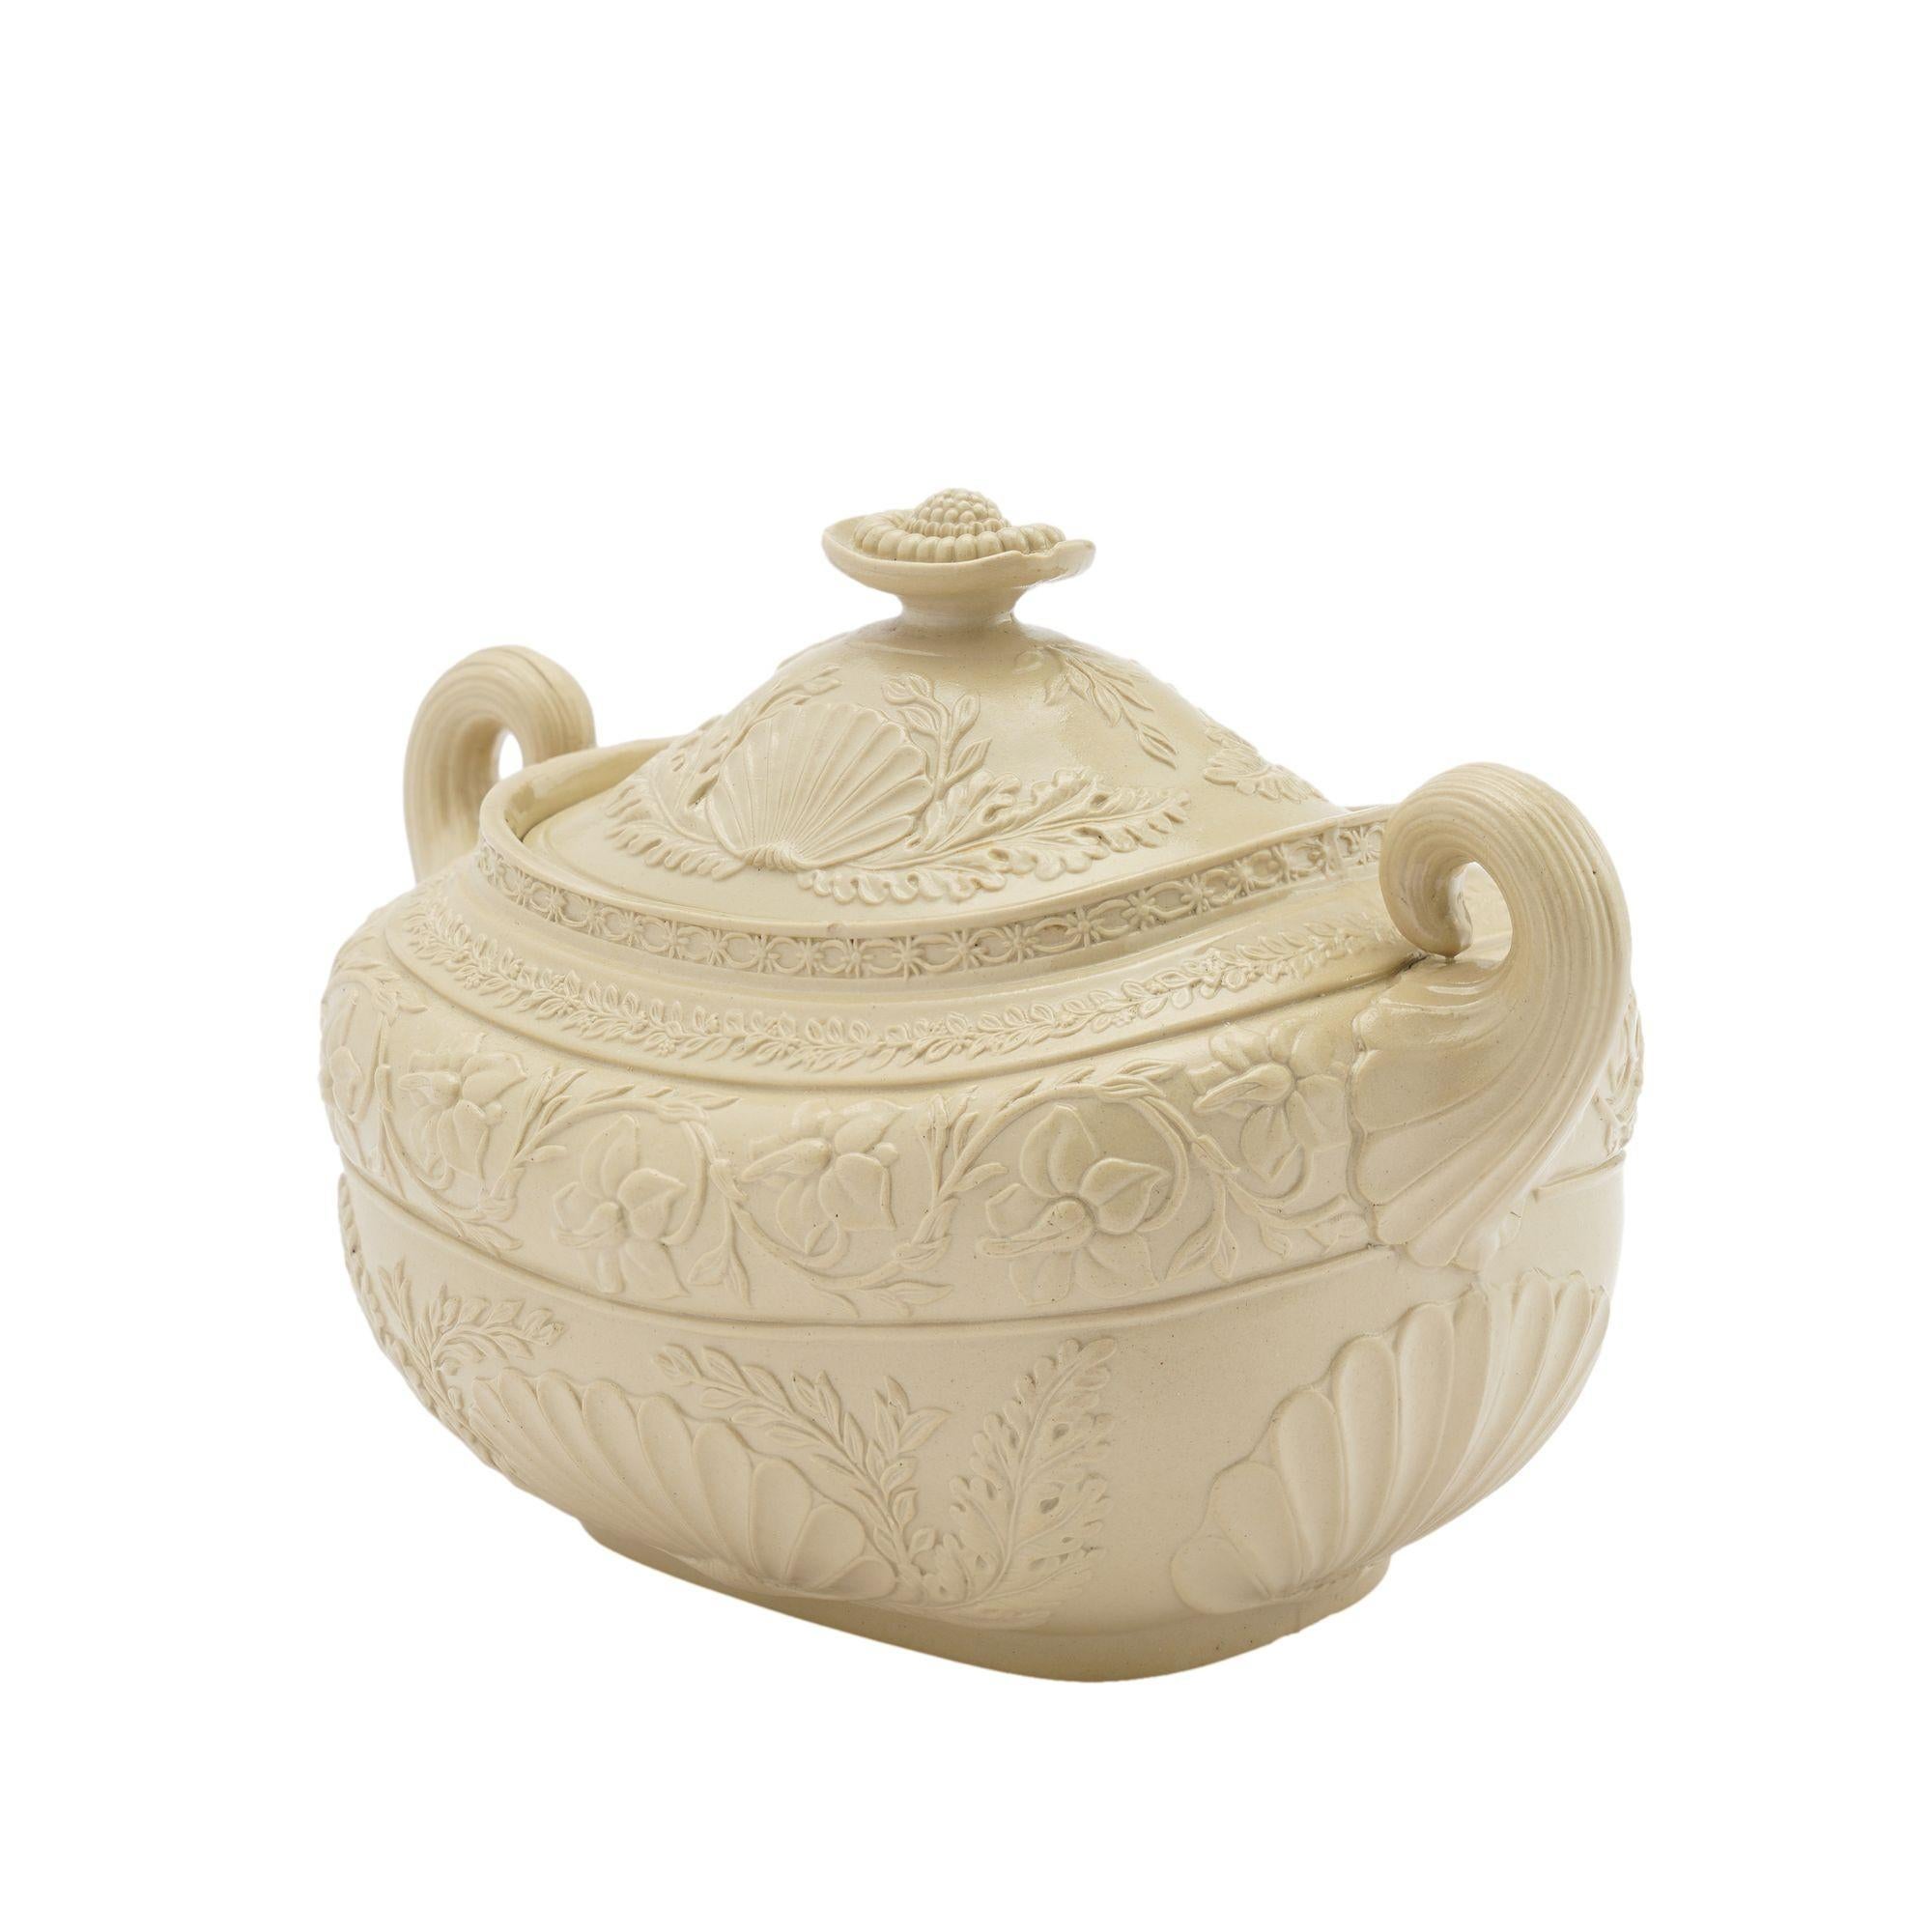 A stoneware sugar bowl in a putty color with fine smear glaze. The double pistol grip handles flank the impressed floral and shell motif covering the surface of the bowl and cover. Unmarked.

Staffordshire, England, circa 1830.